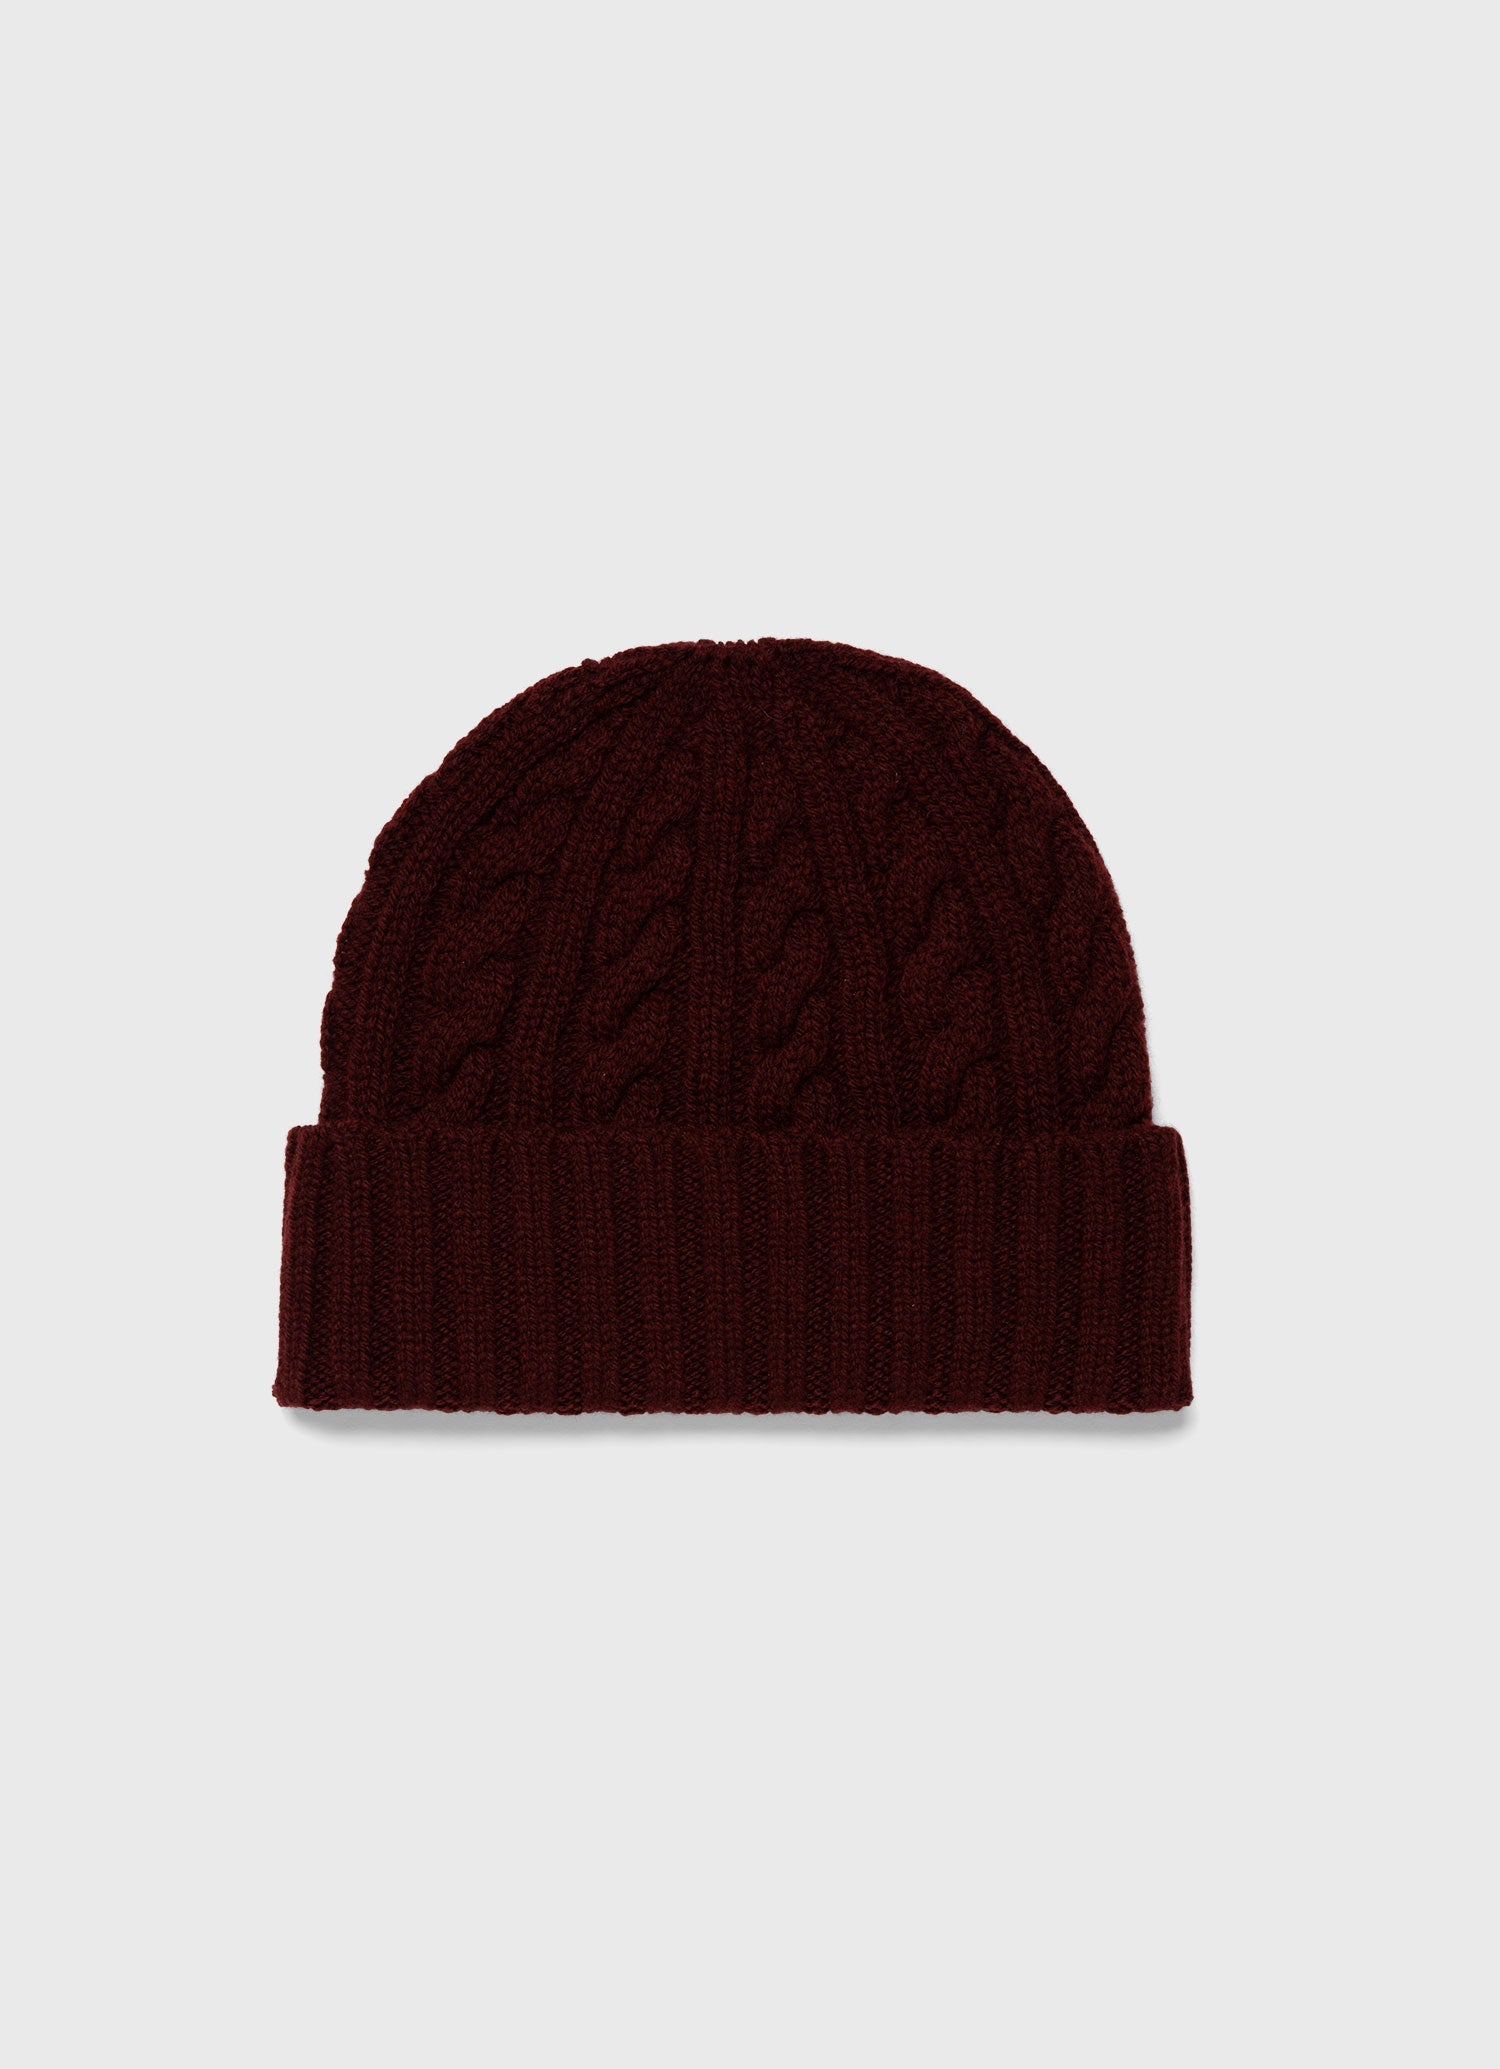 Lambswool Cable Hat in Maroon